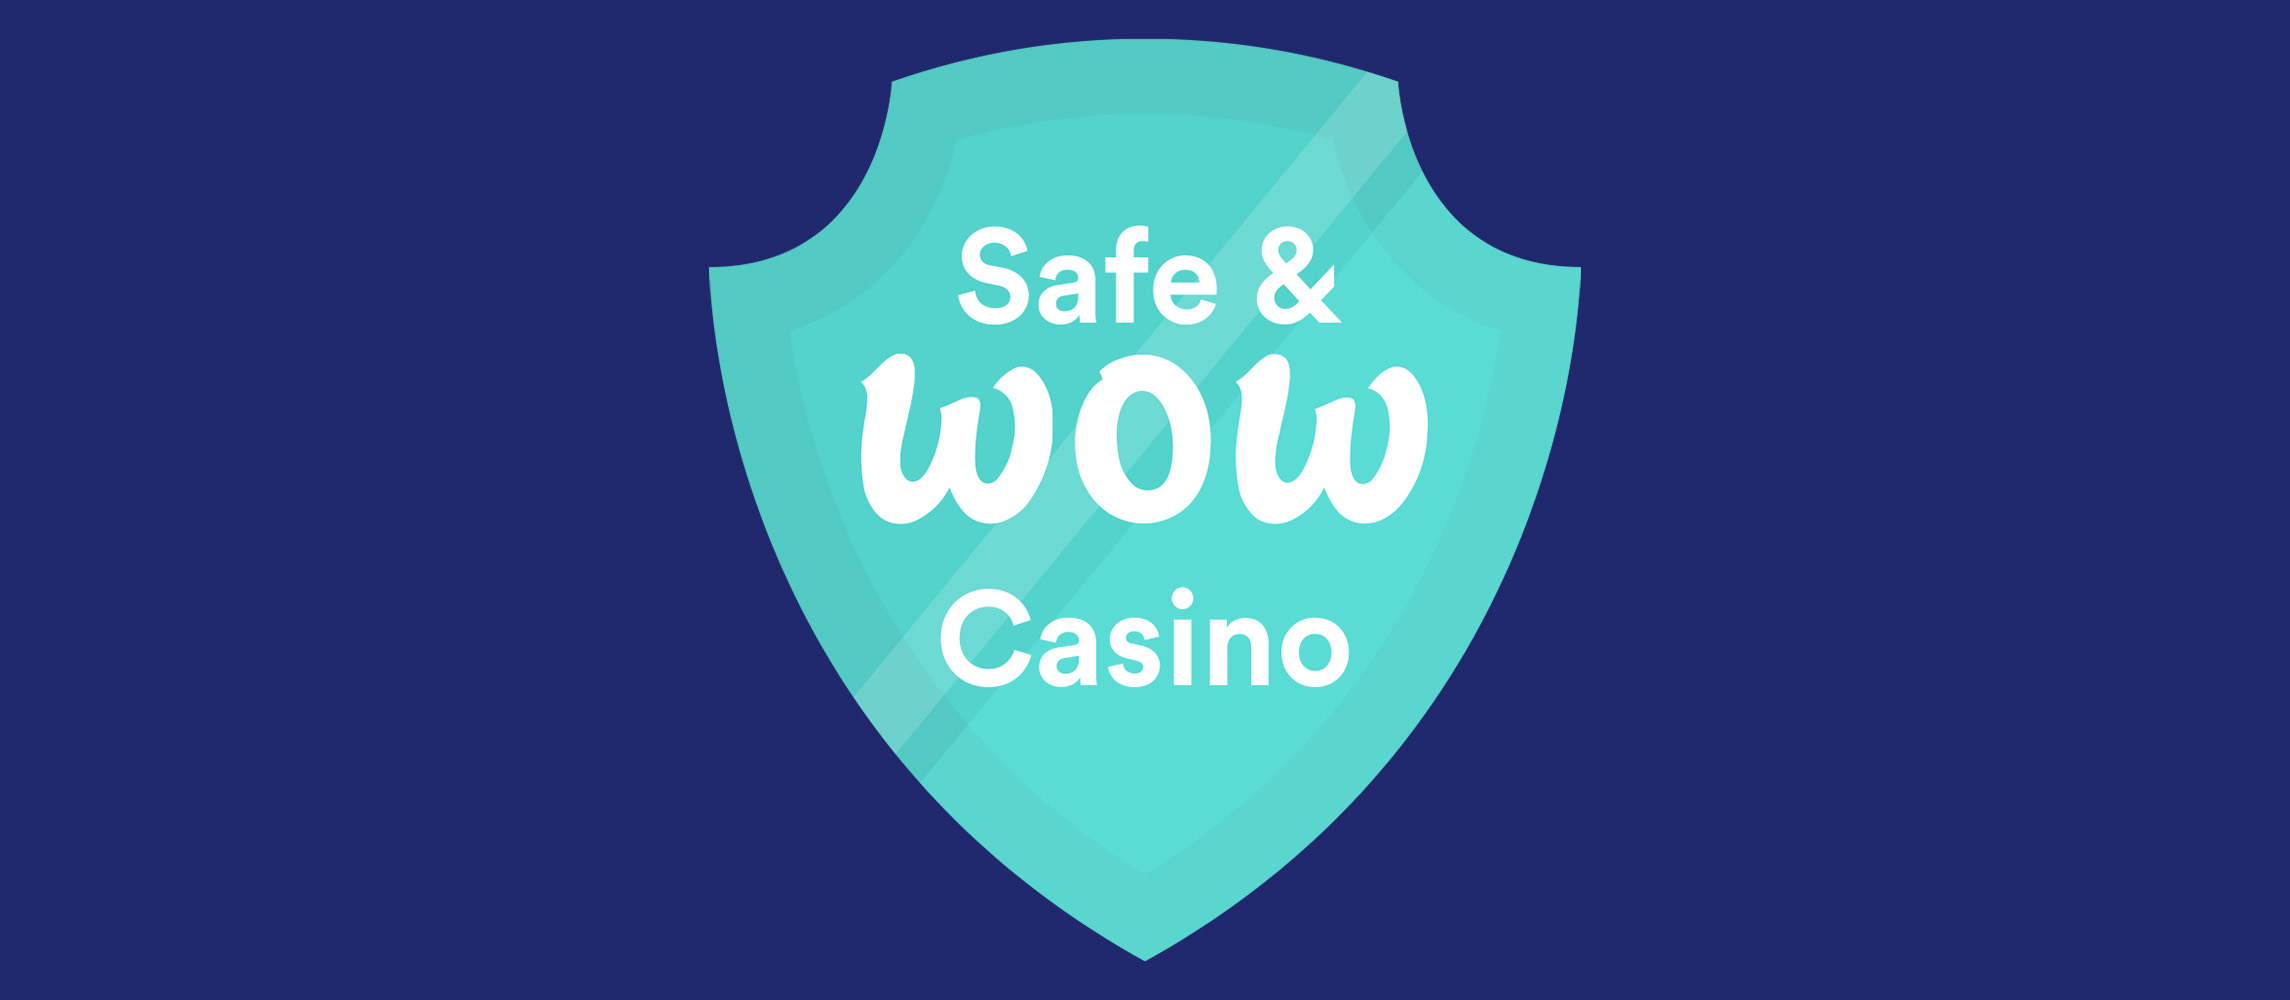 CasinoWow is giving Safe&WOW Casino badge to the safest online casinos in the UK